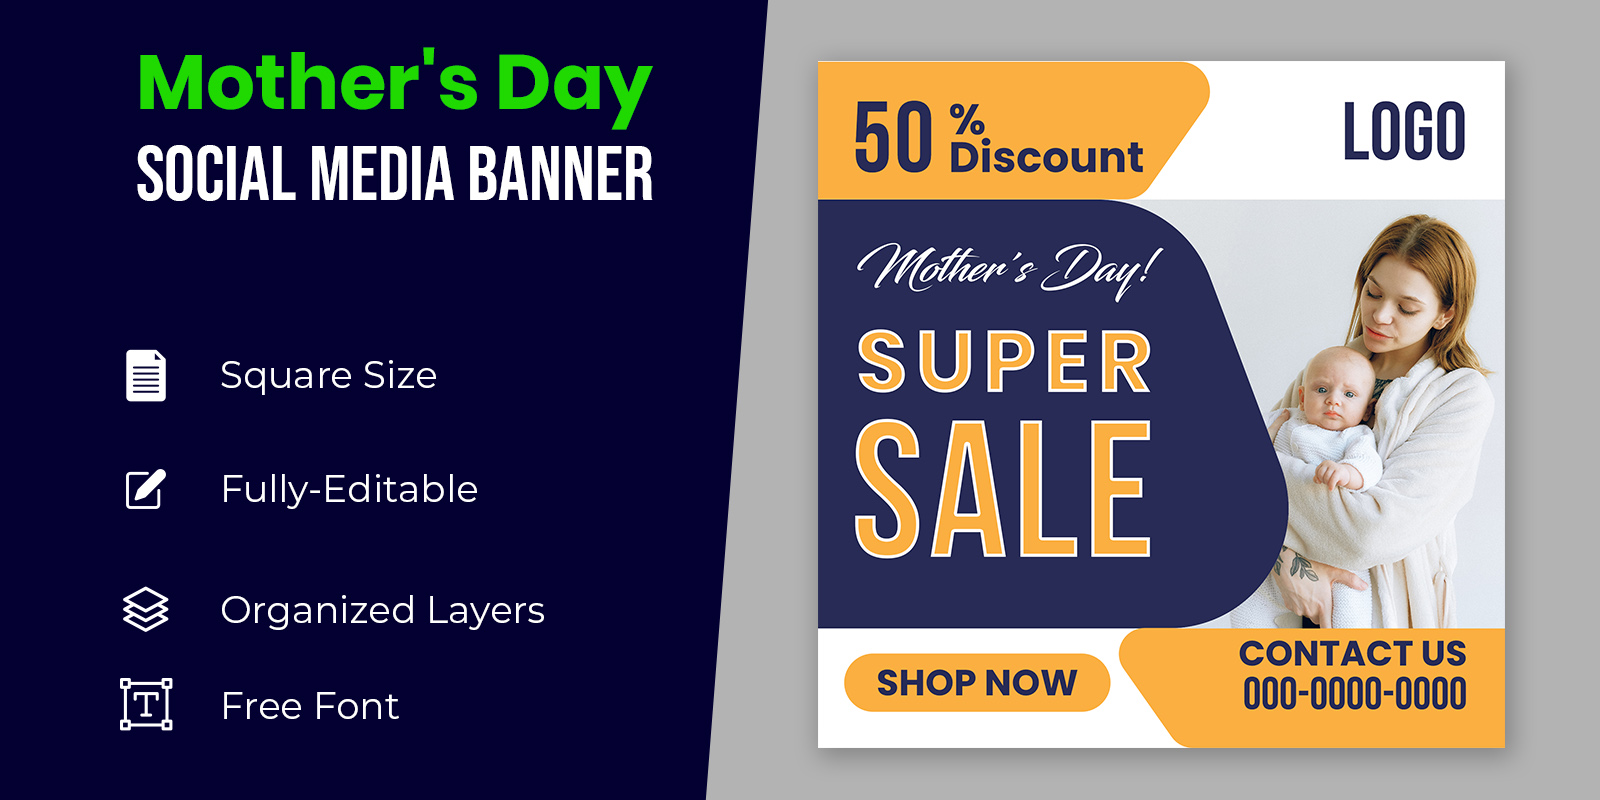 Mothers Day Banner Design Yellow & Blue Color